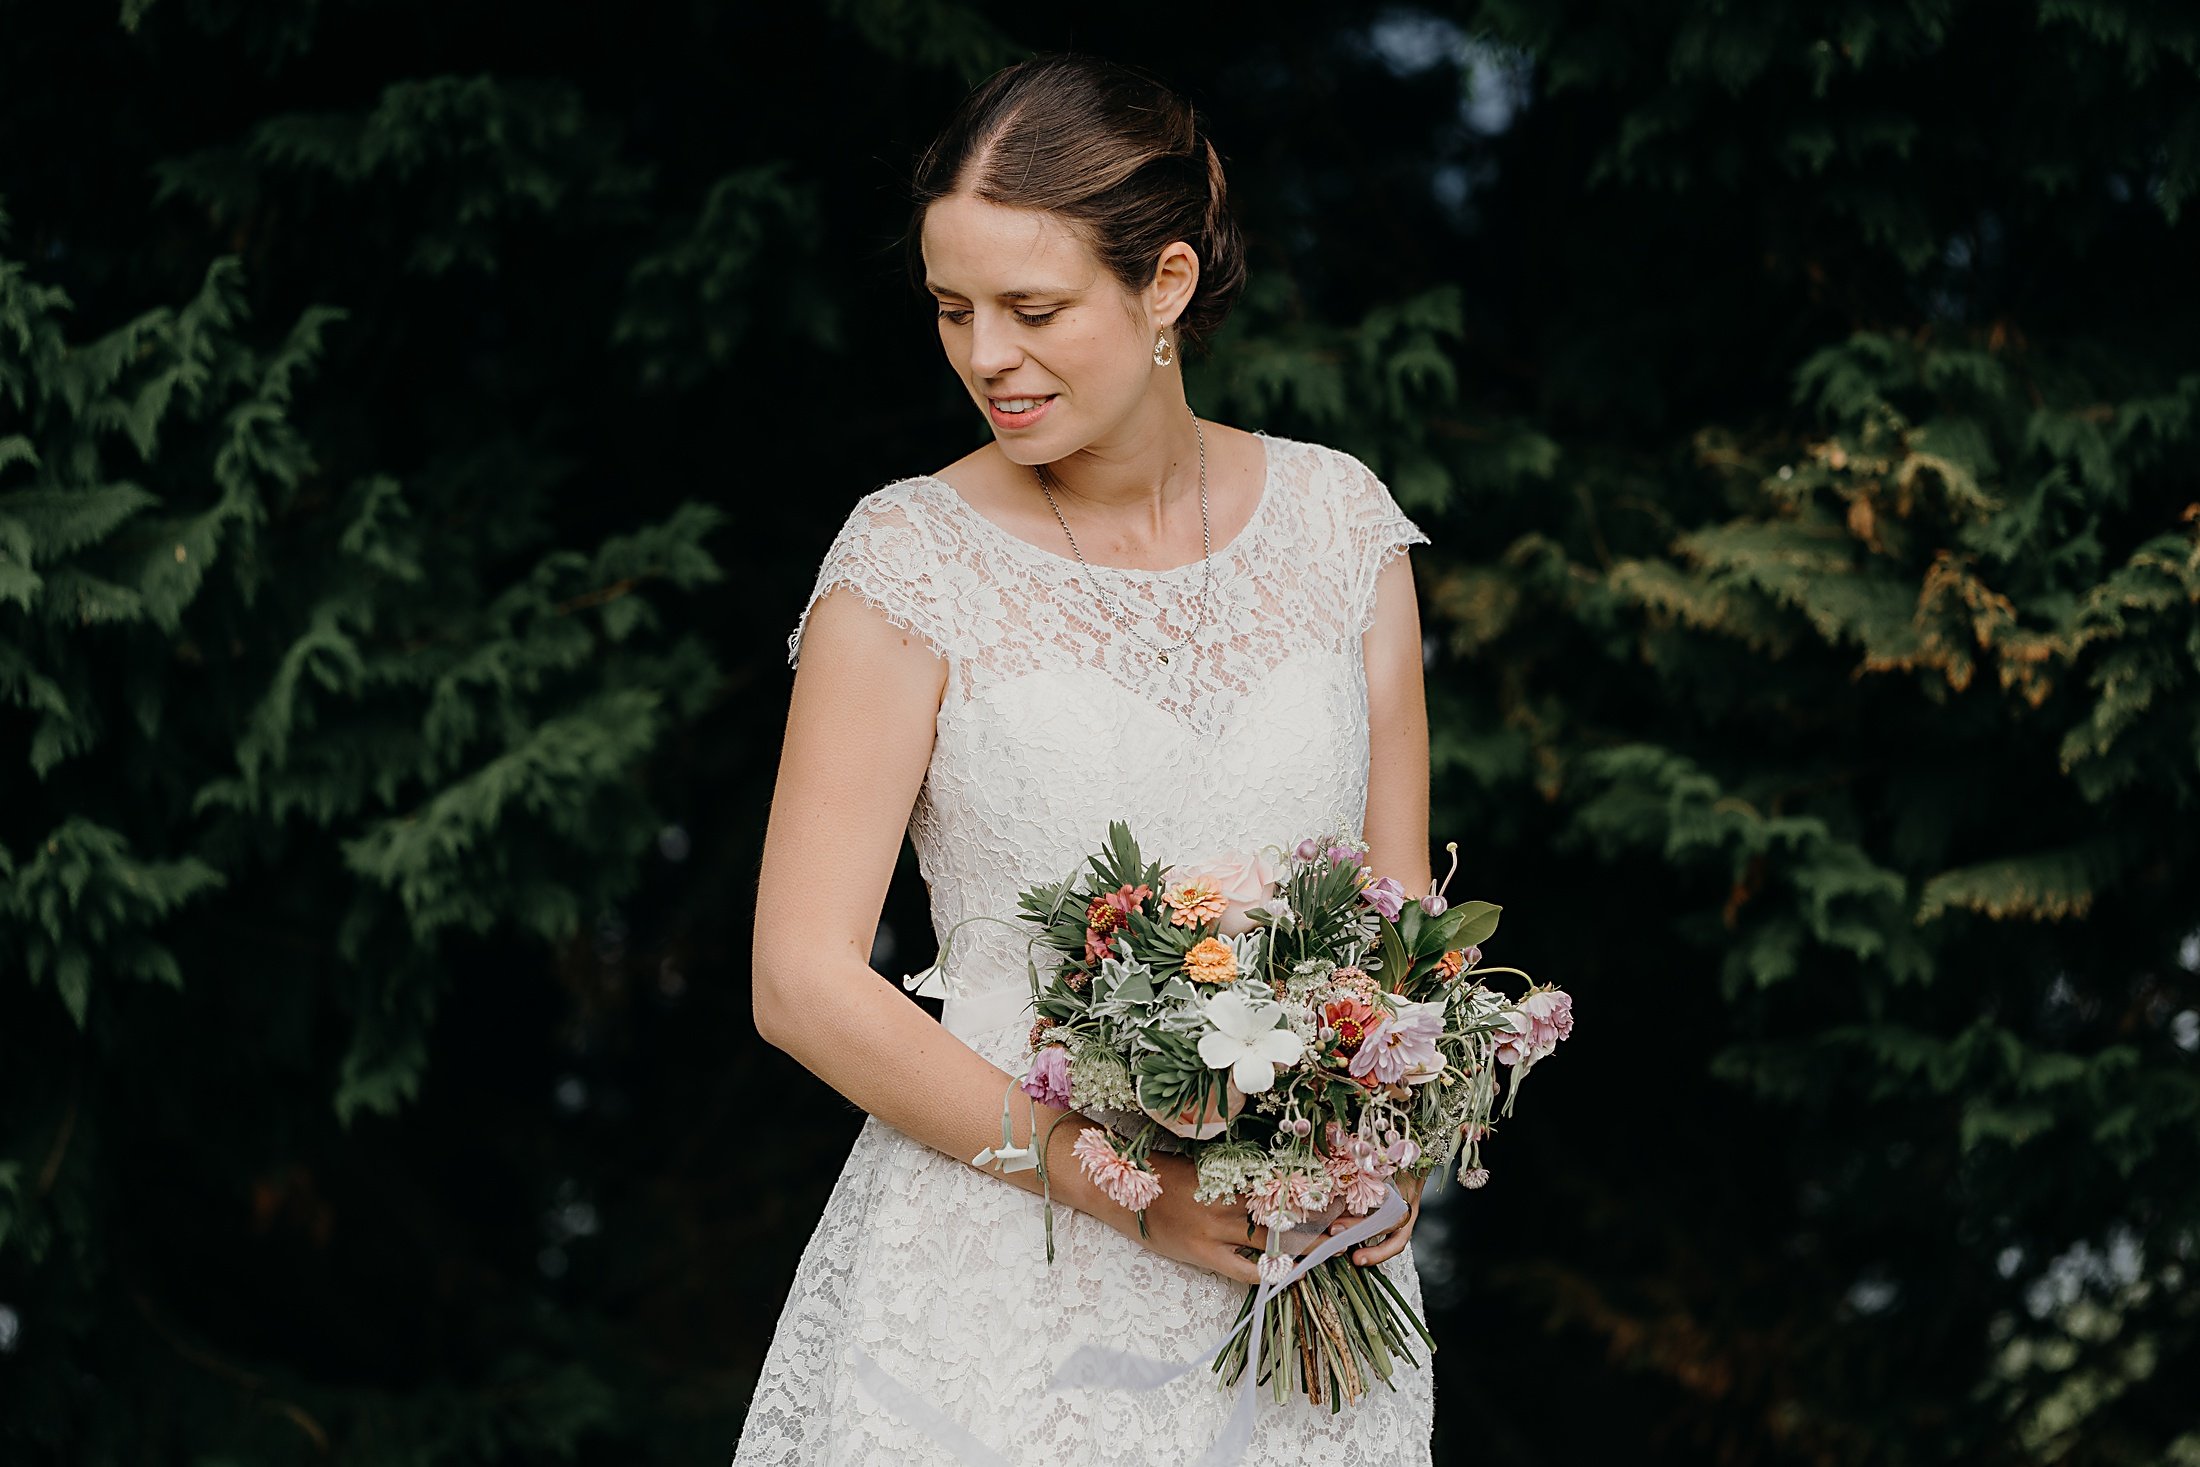 Daisy by Katie Yeung Wedding Dress, baby bump & bouquet